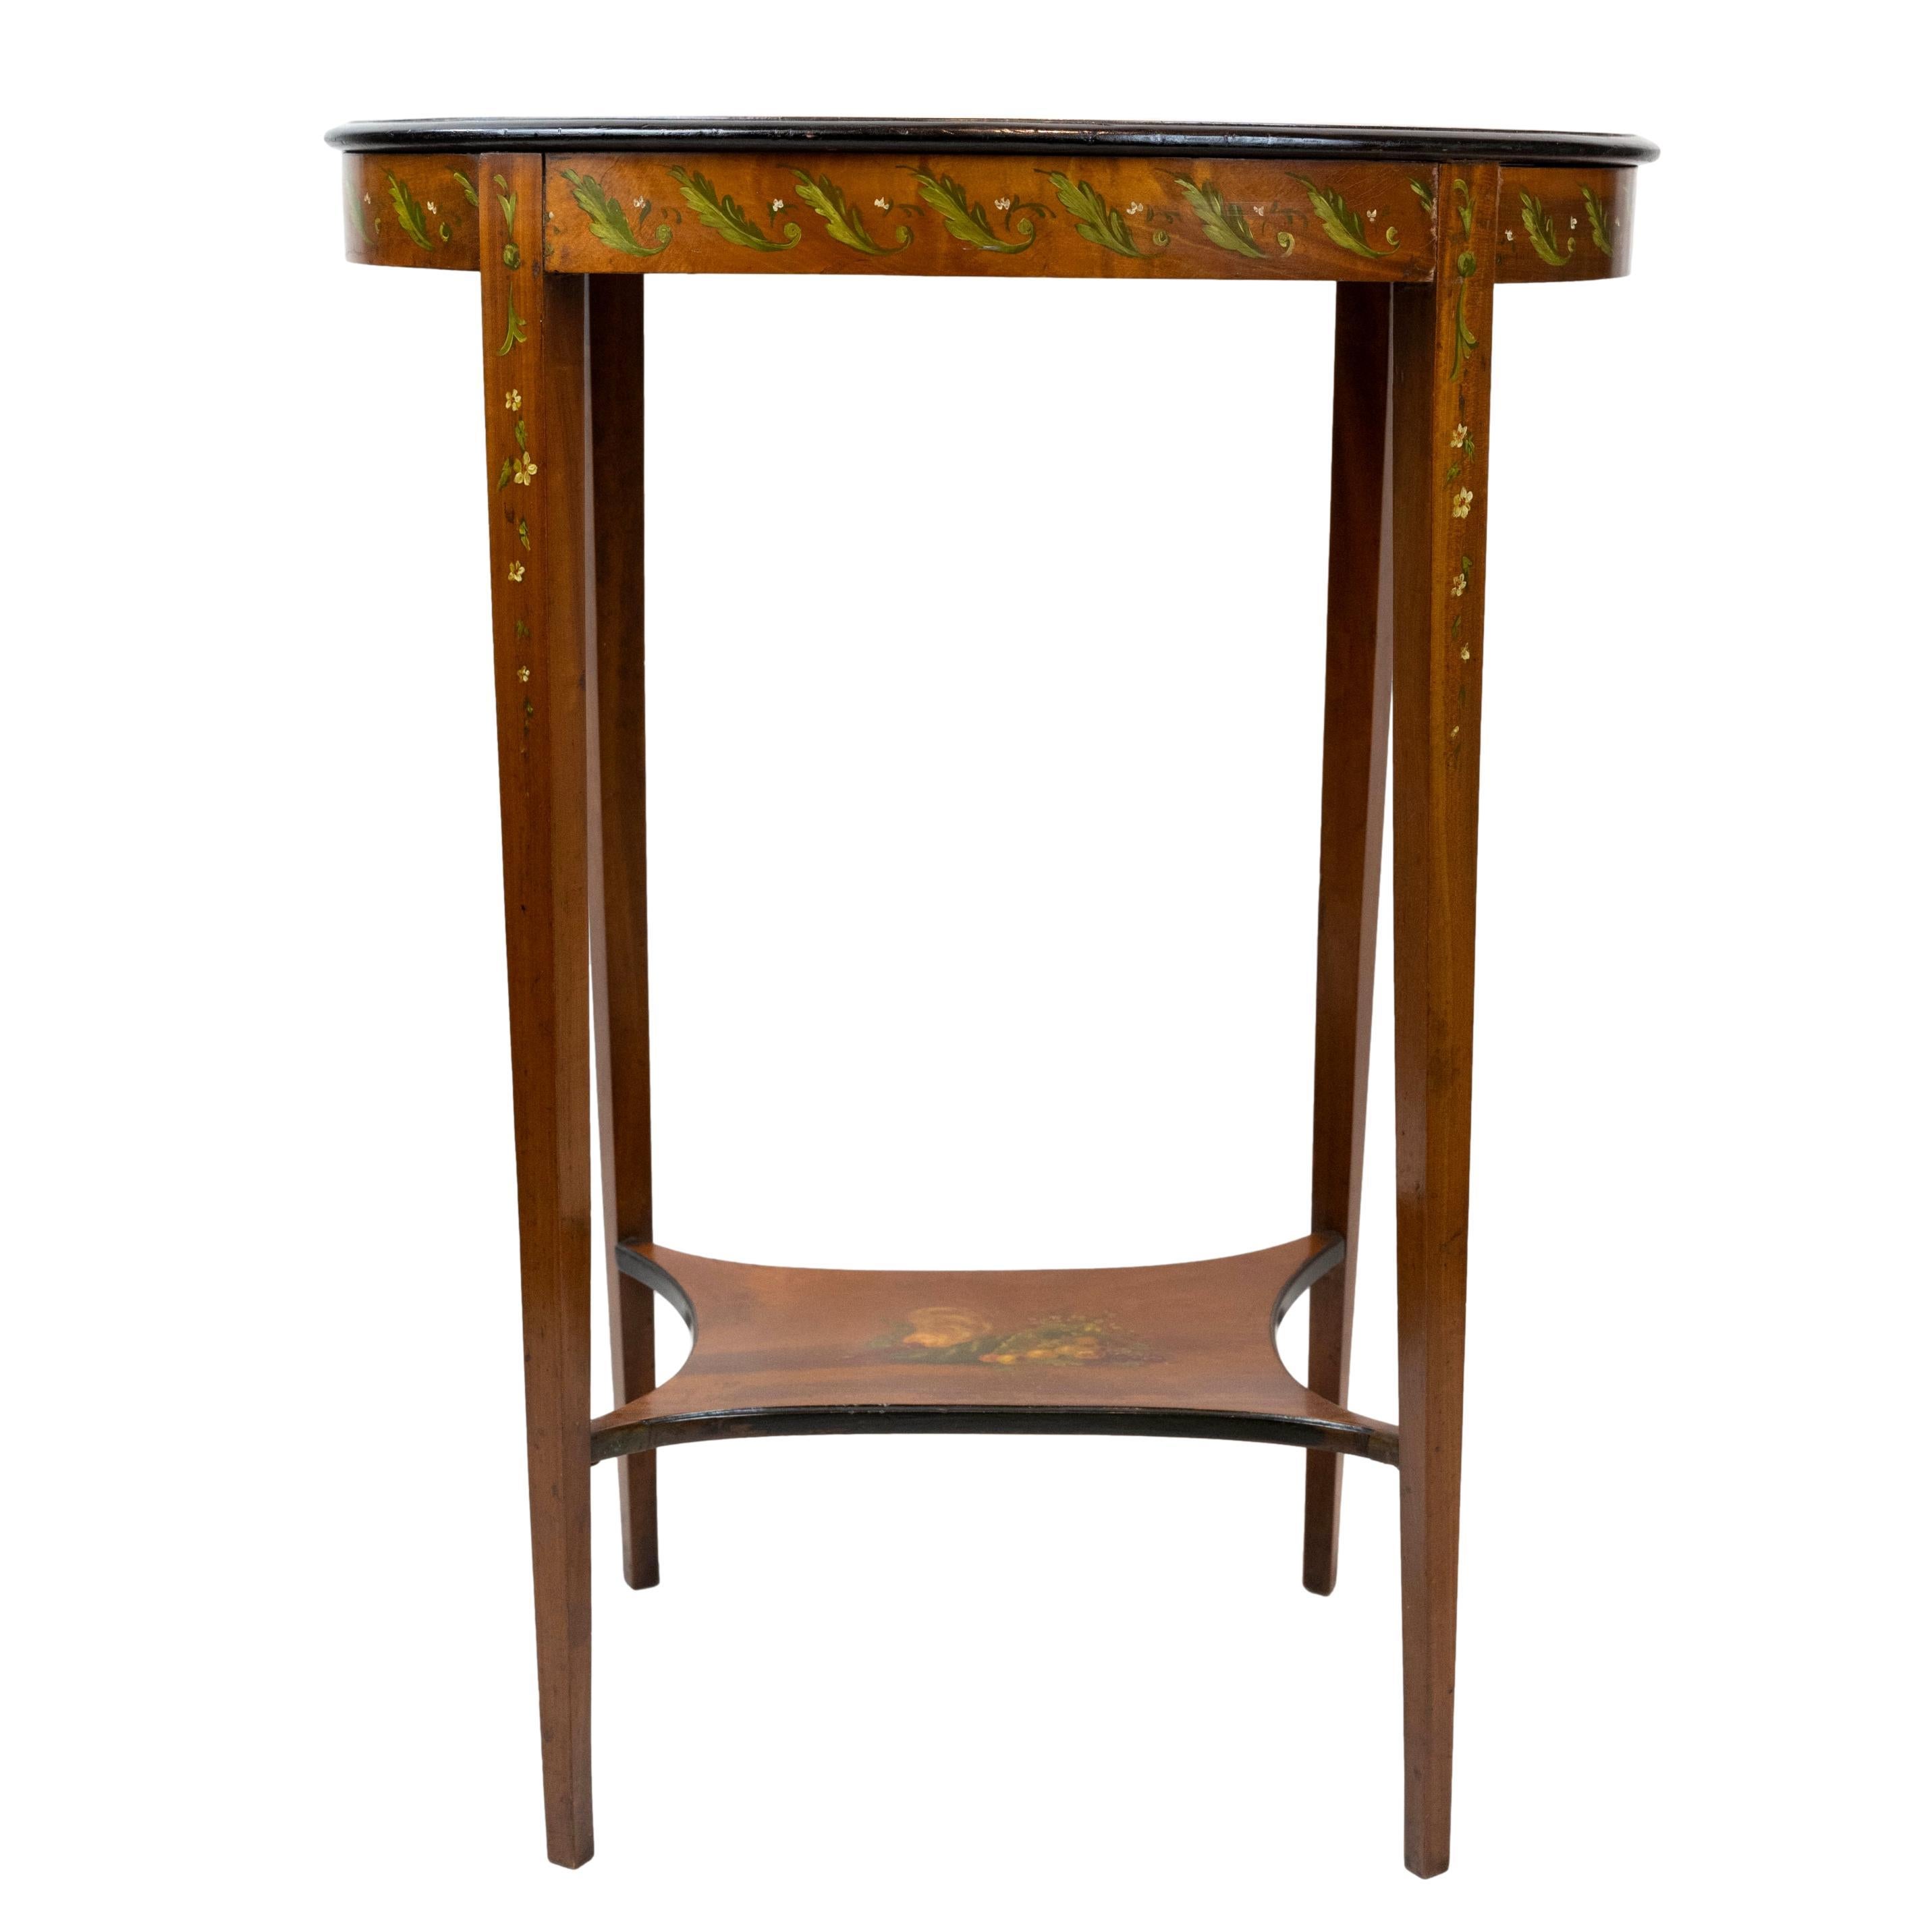 Edwardian Painted Satinwood Two-Tier Occasional Table, English, ca. 1900 In Good Condition For Sale In Banner Elk, NC